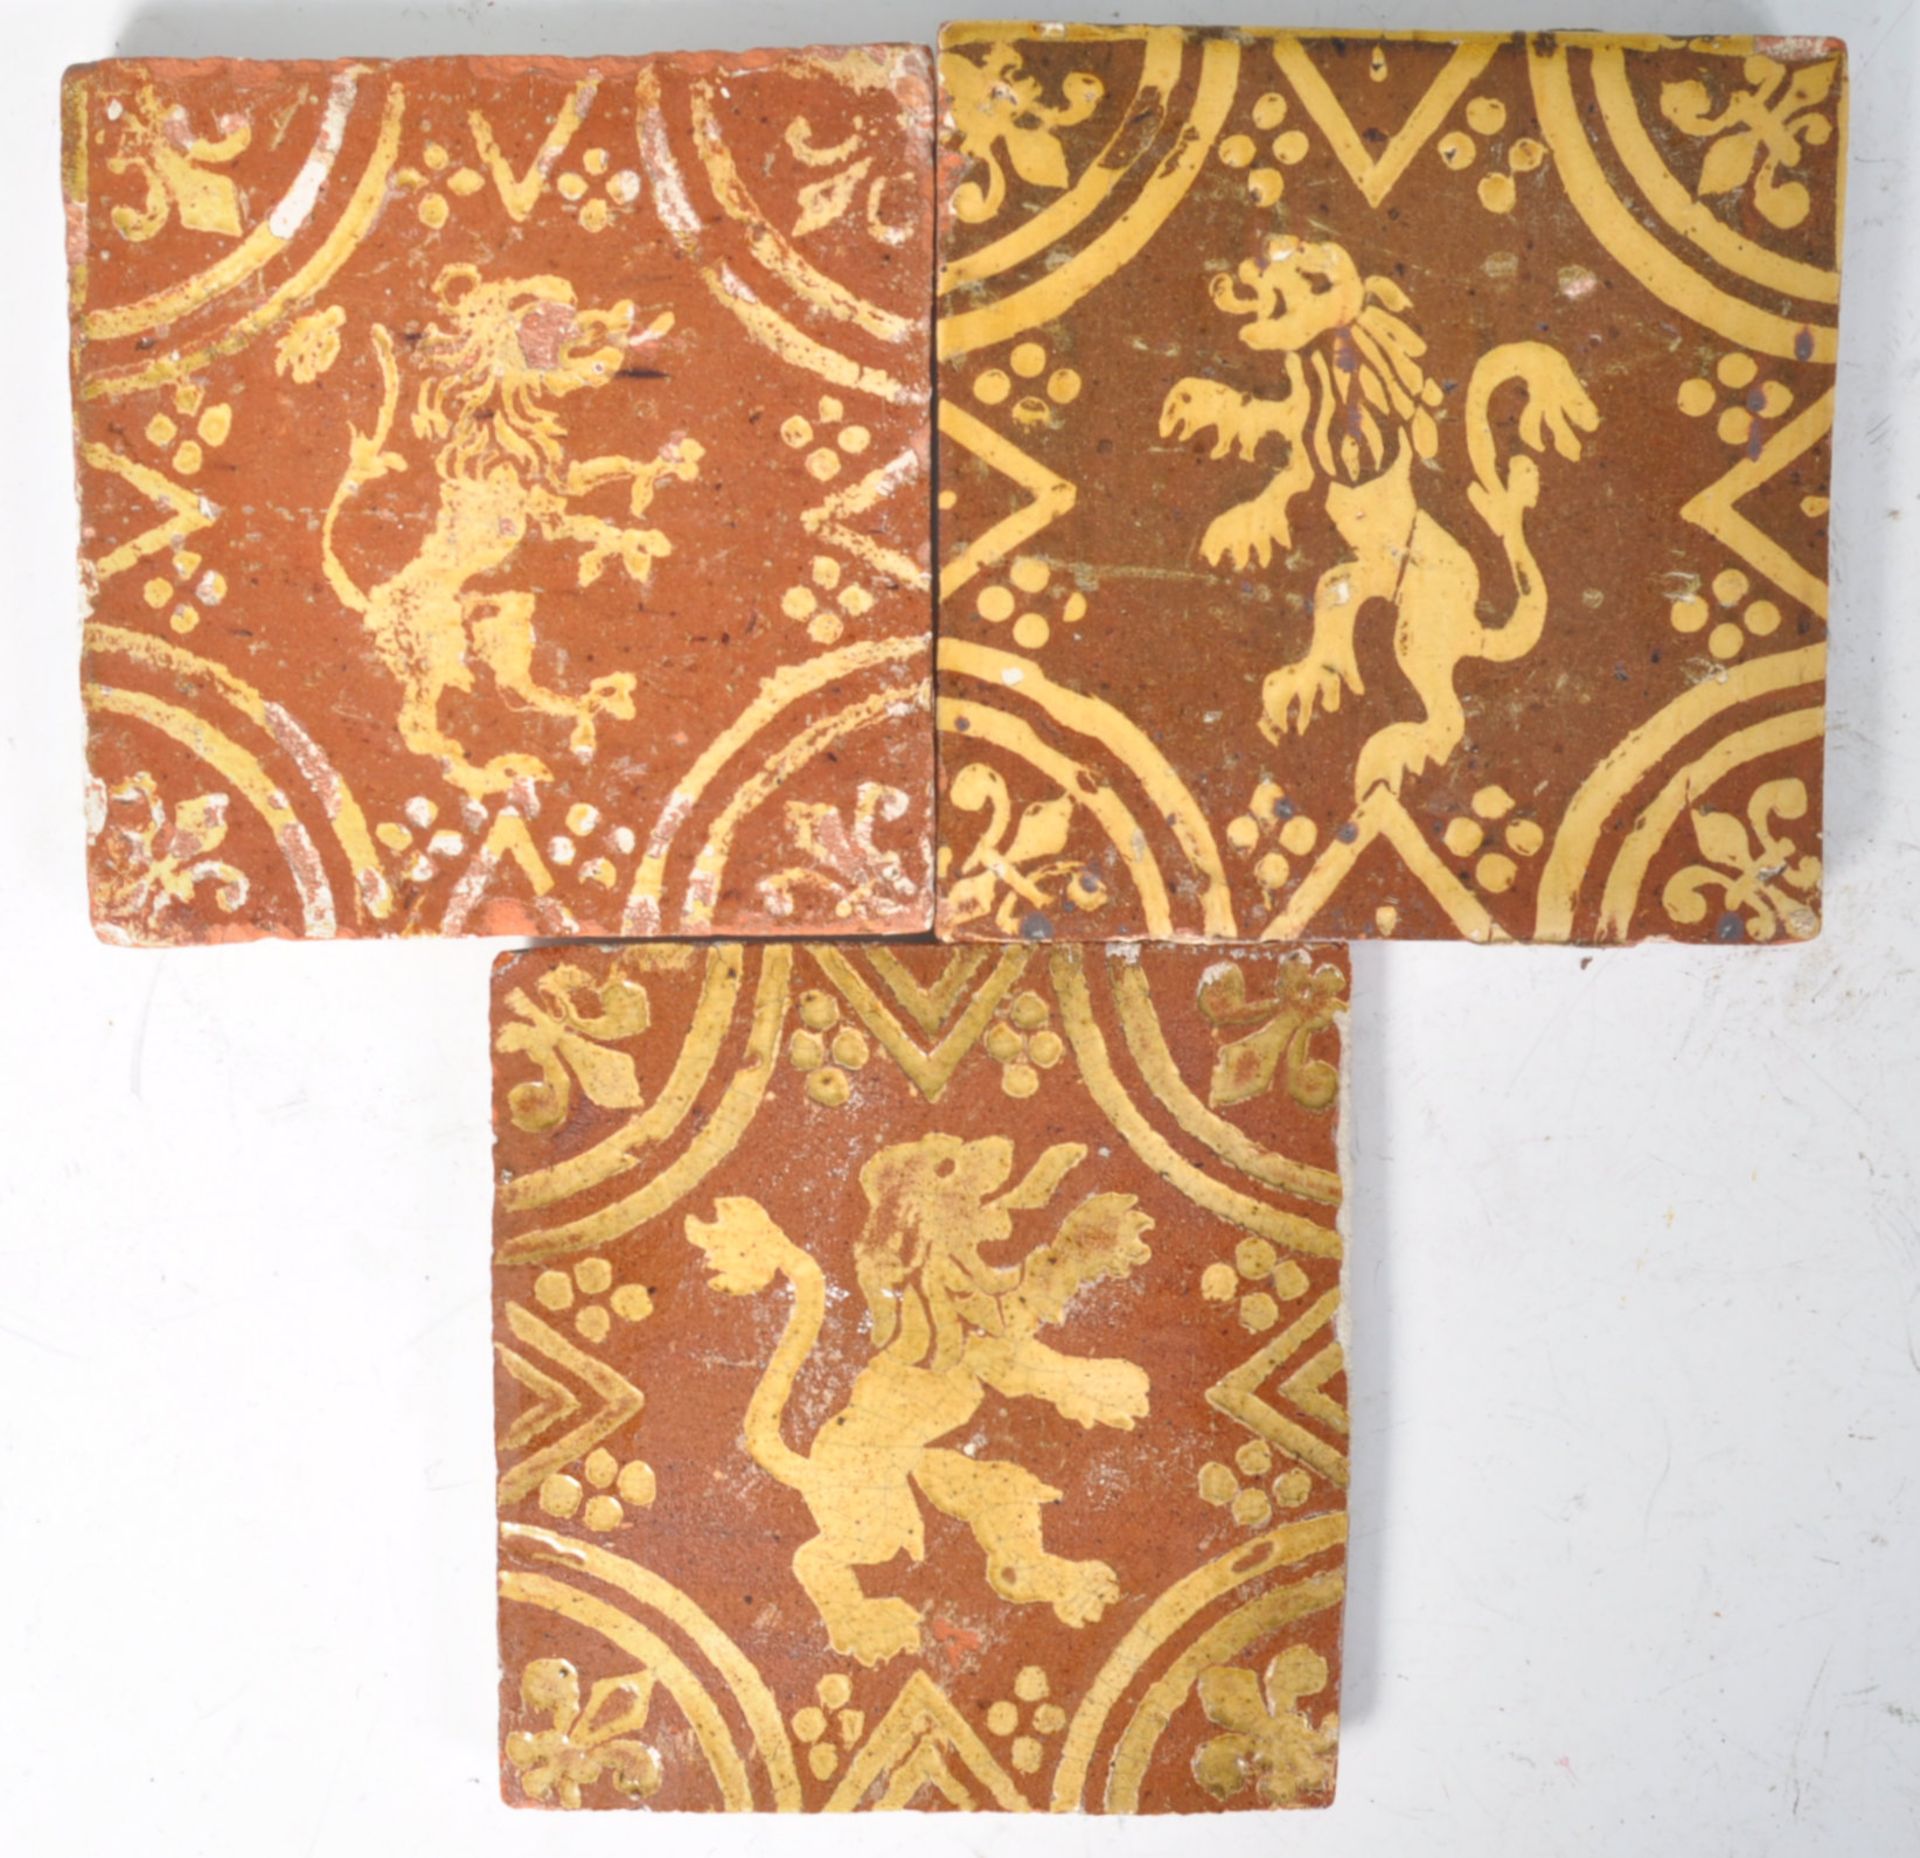 COLLECTION OF THREE 17TH CENTURY STONE TILES